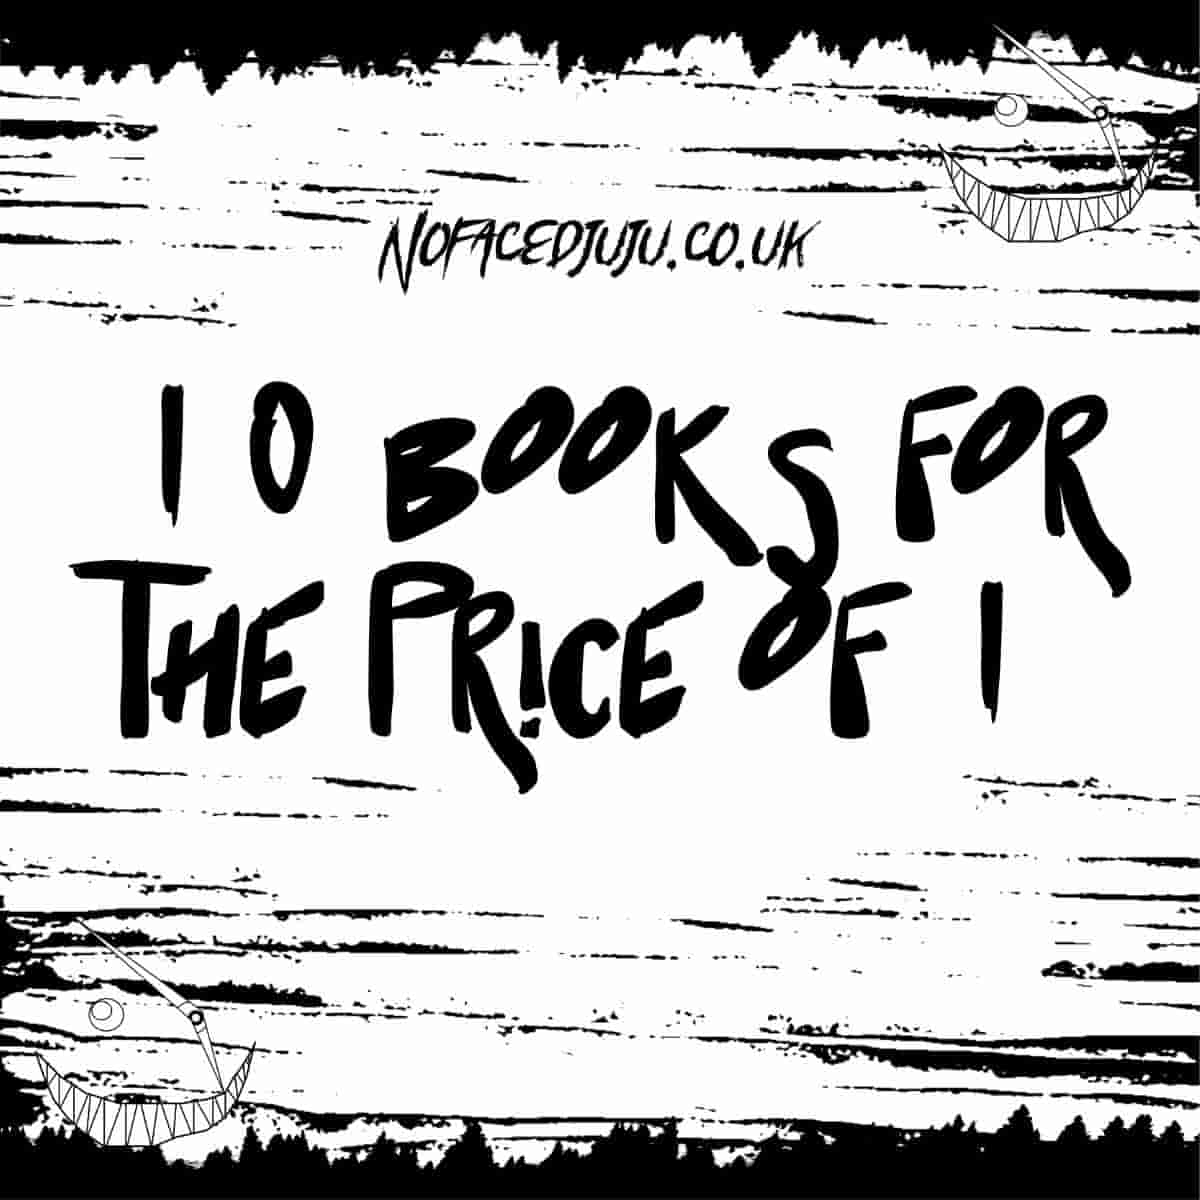 How To Get More Books For Your Money